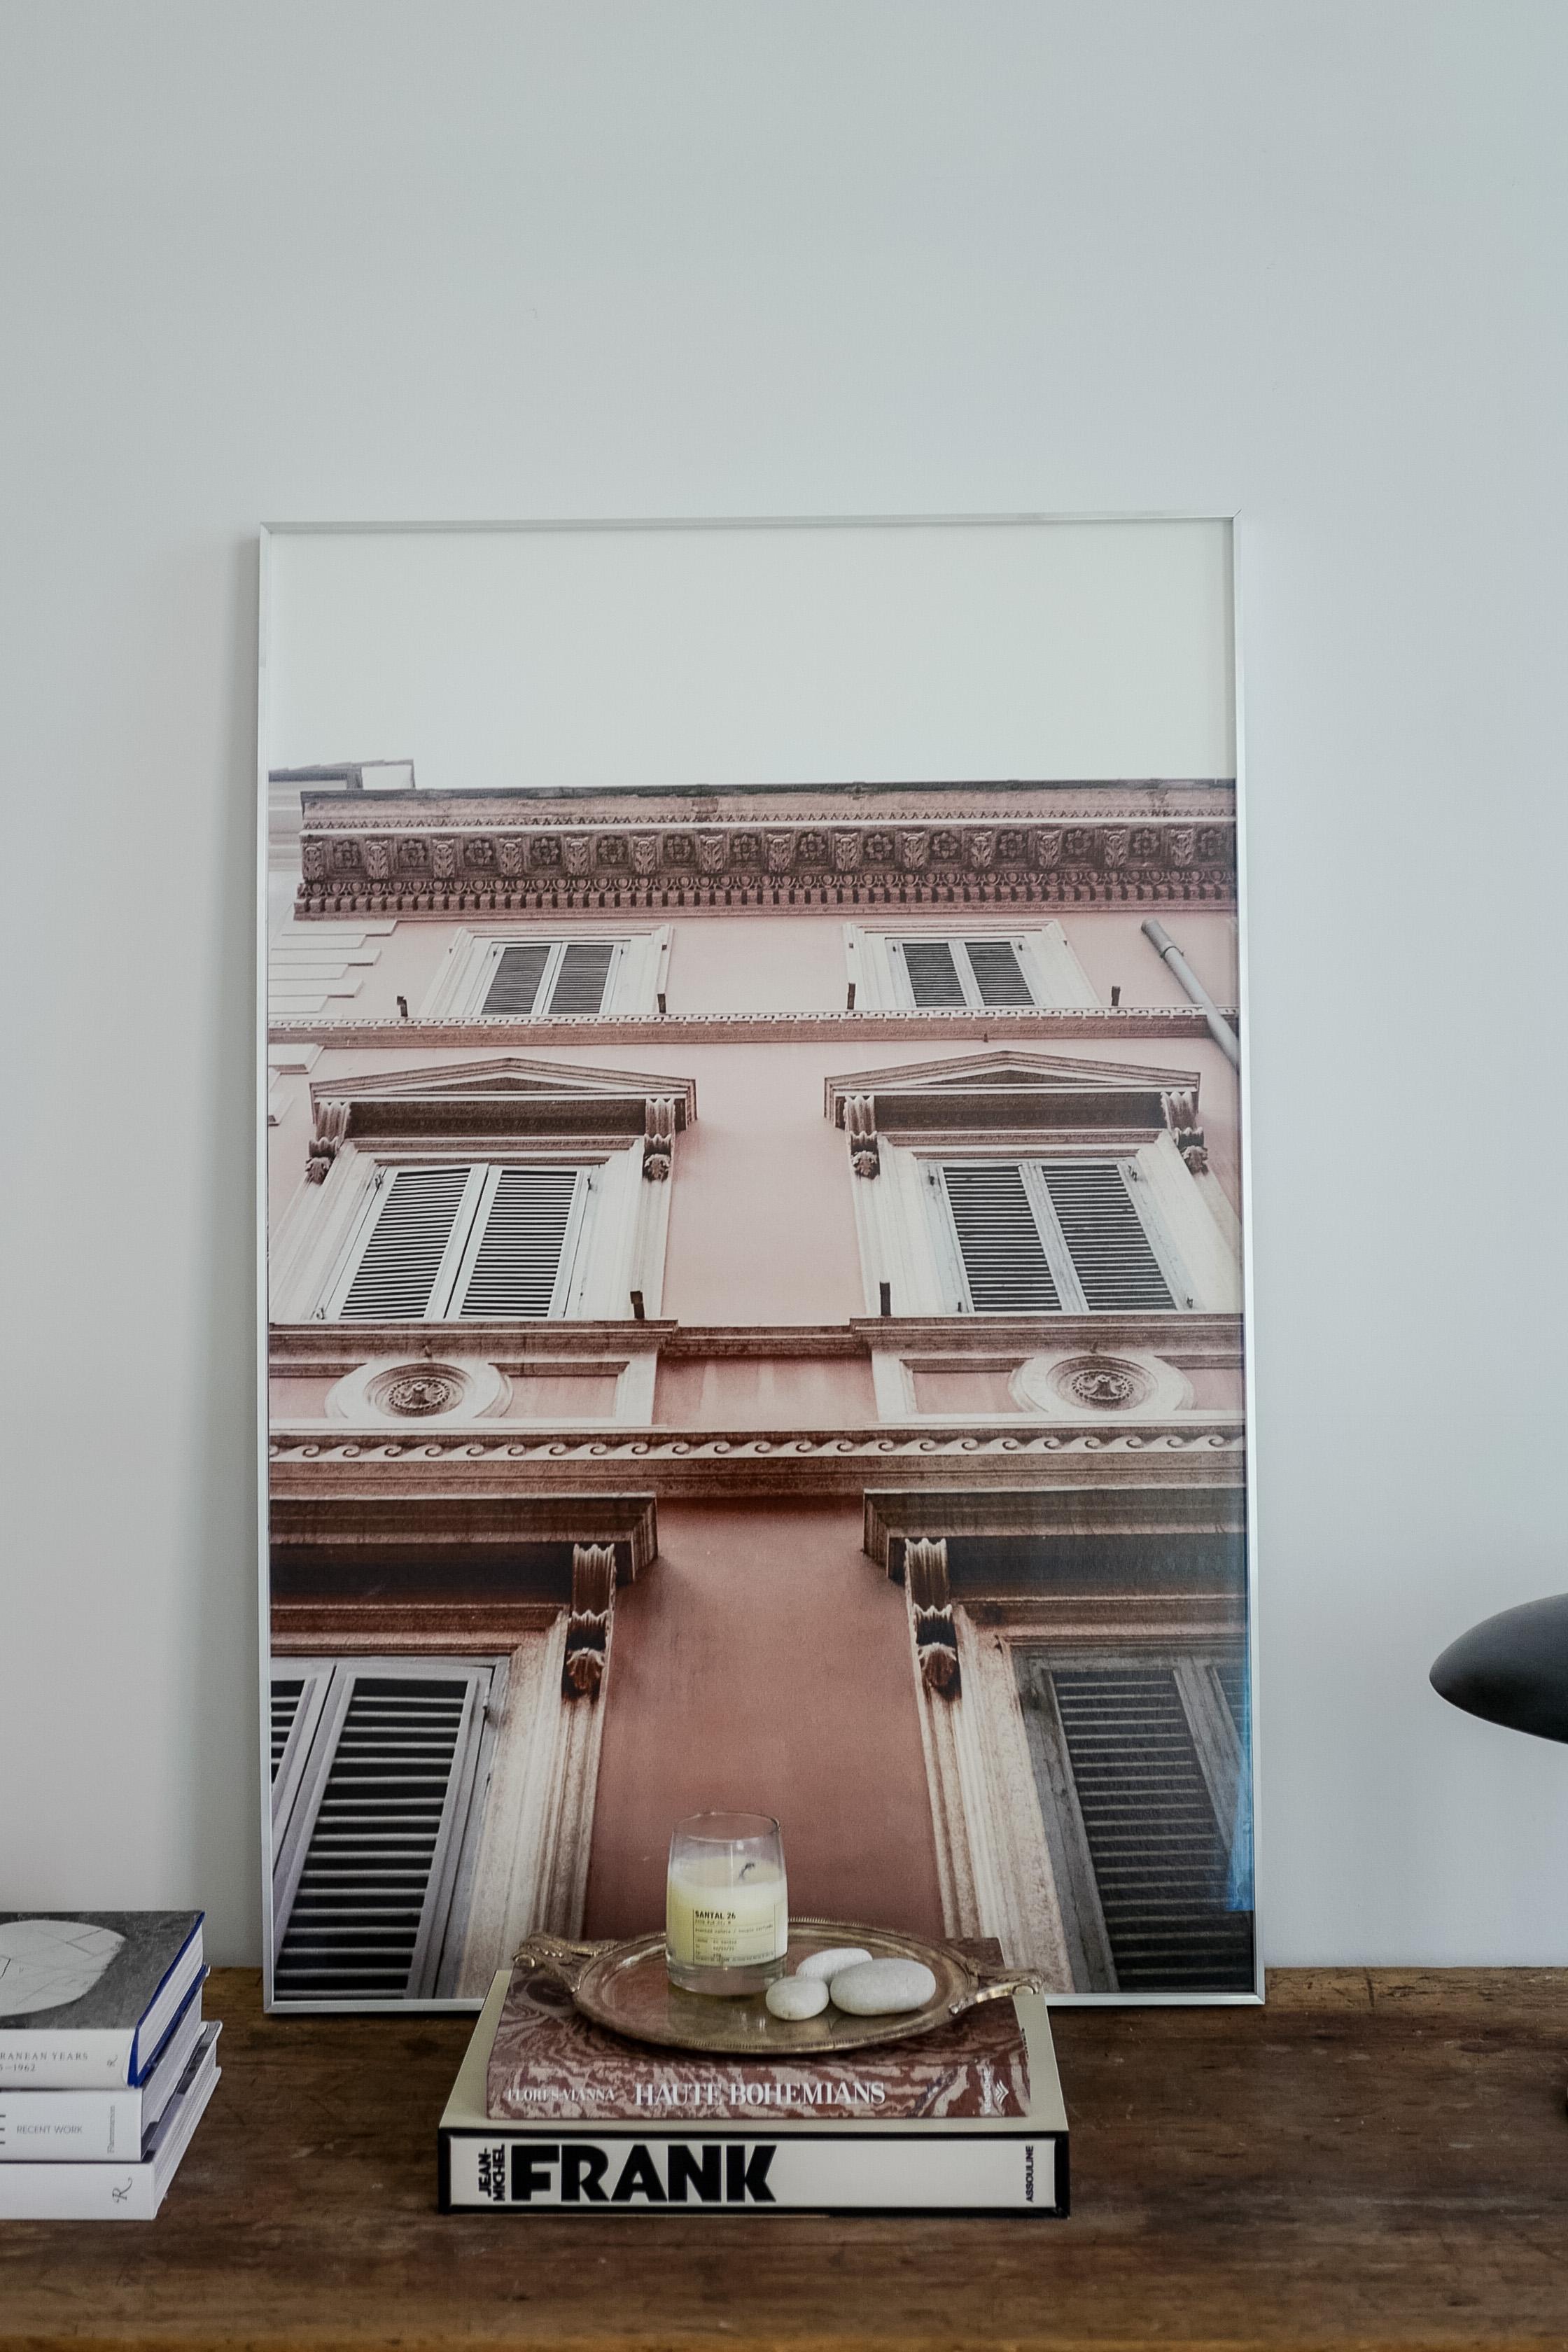 An original limited edition enlarged film print of Rome made in 2020. Framed in thin aluminum and zero glass for a modern meets old look. Photograph taken by interior designer and artist Mallory Kaye. 